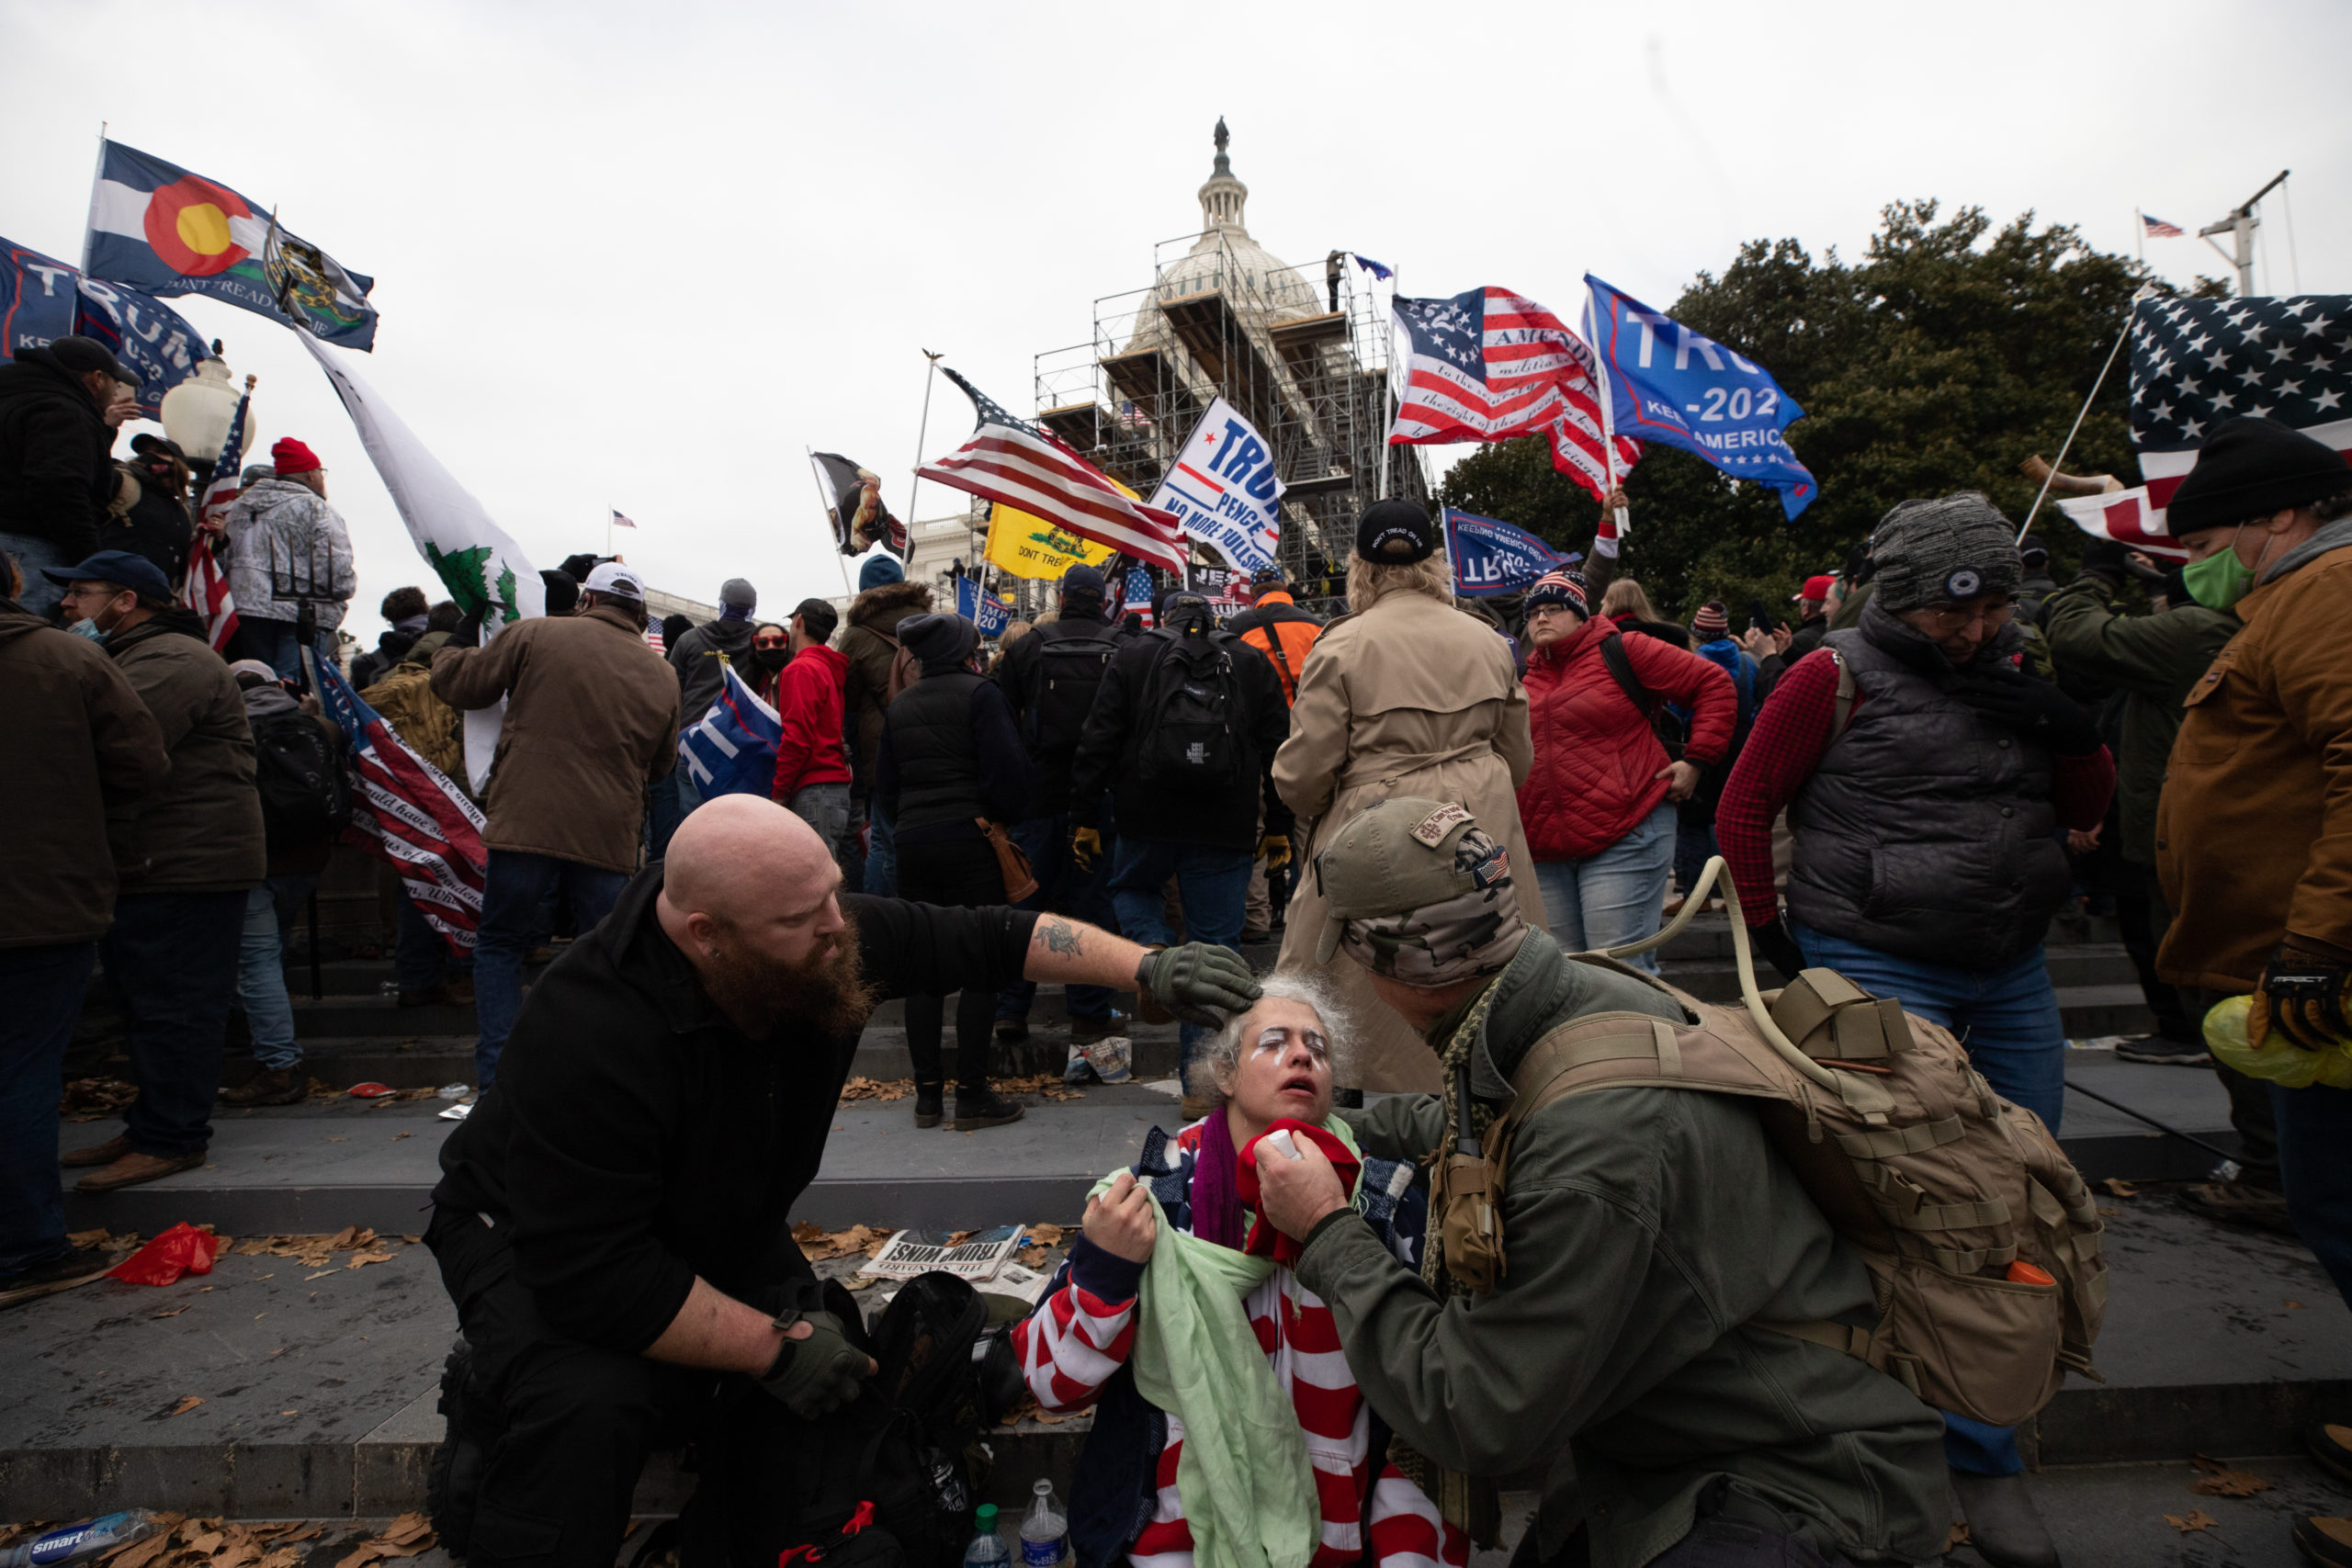 A woman was treated after being exposed to tear gas on the steps of the Capitol Building on January 6, 2021, in Washington, D.C. Supporters of former President Donald Trump stormed the Capitol Building in an effort to stop the Congressional certification of President Joe Biden. (Kaylee Greenlee - DCNF)